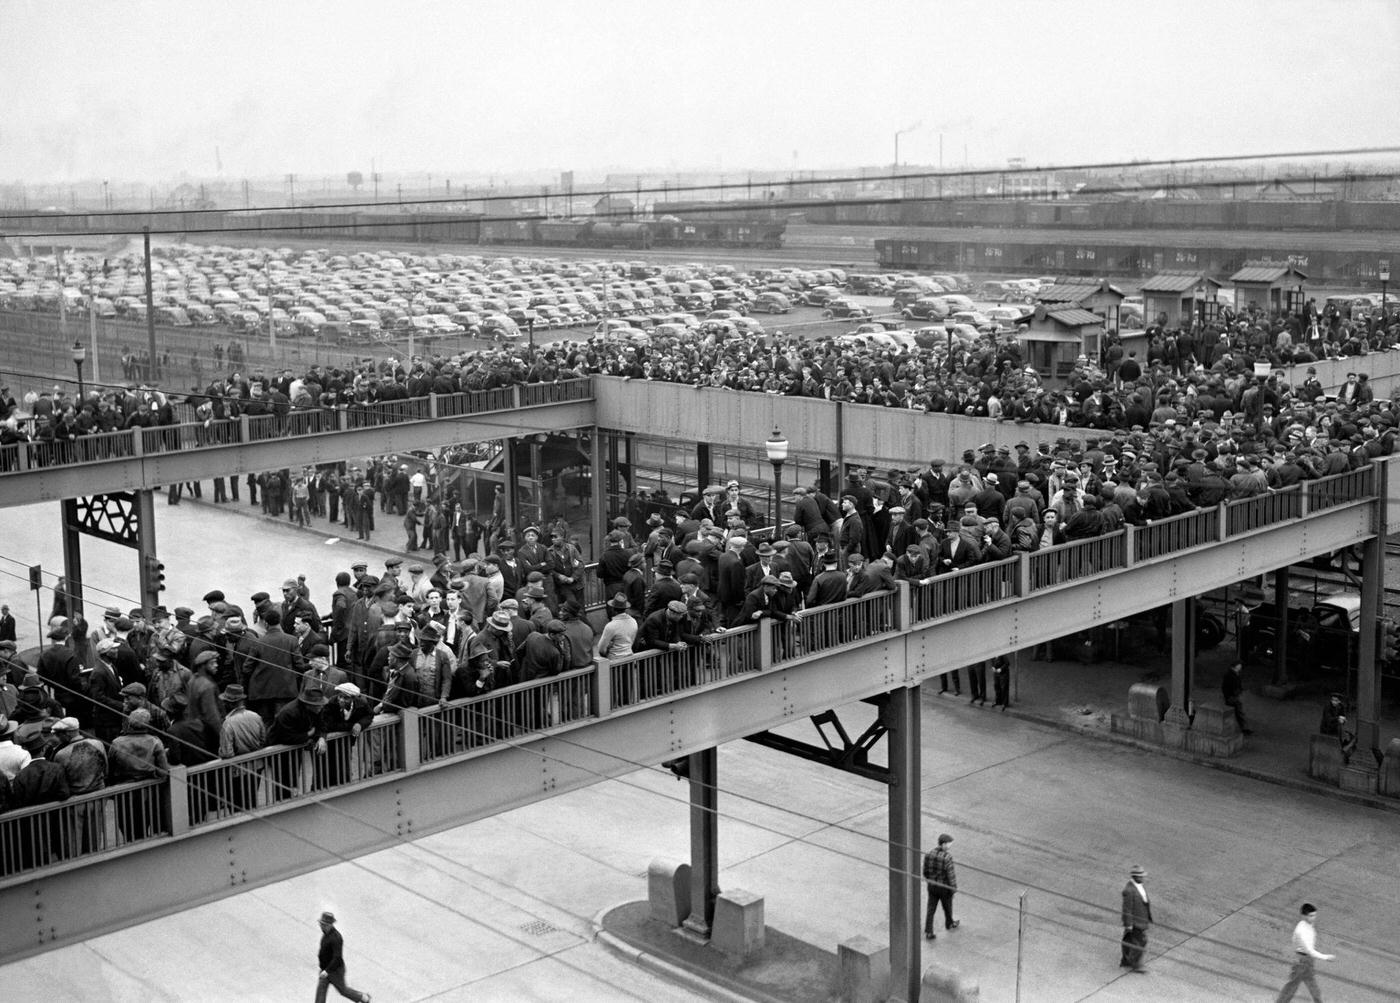 A large crowd of people gather near the Ford Motor Company River Rouge plant during the Detroit Ford Labor Strike in Dearborn, Michigan, April 1941.